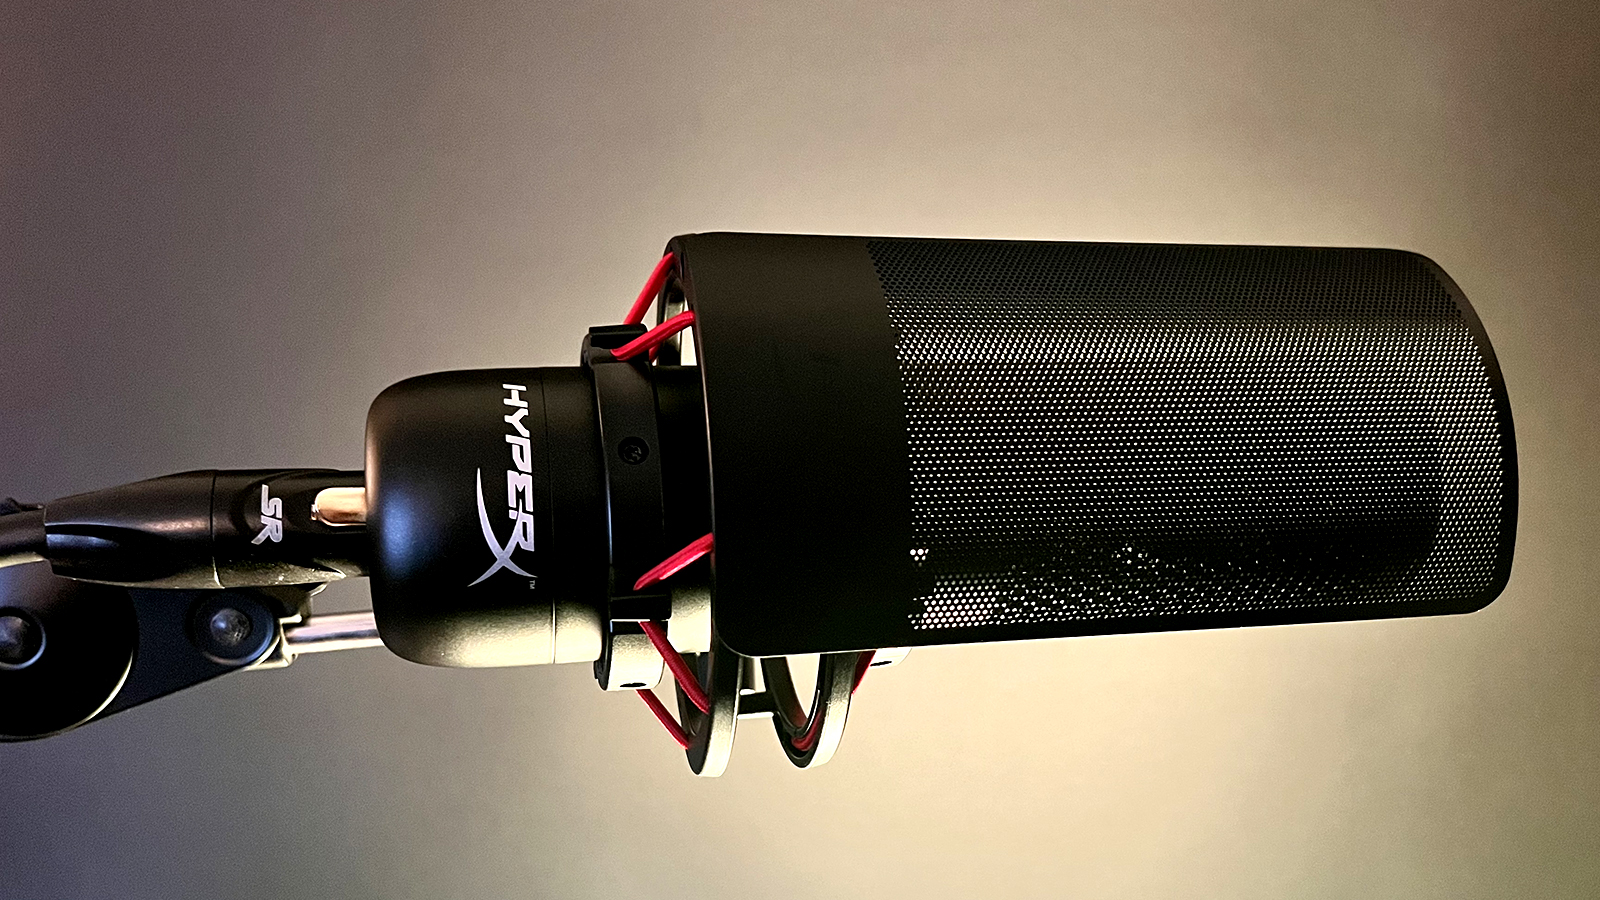 HyperX QuadCast S Review: Add some more color to your content creation